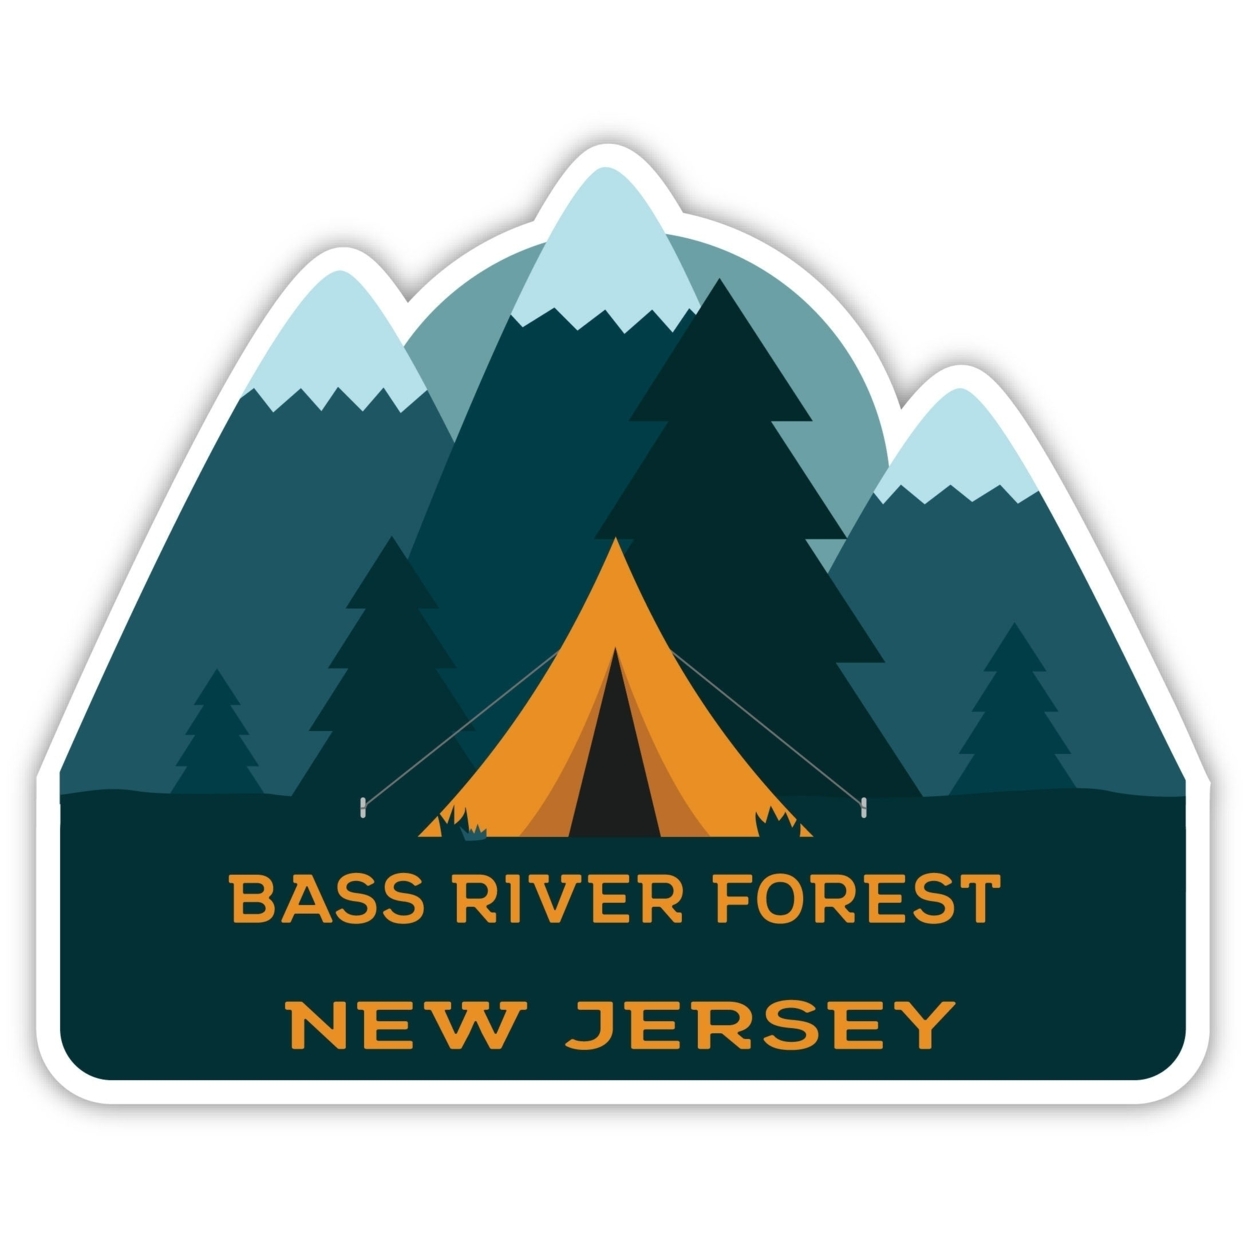 Bass River Forest New Jersey Souvenir Decorative Stickers (Choose Theme And Size) - Single Unit, 10-Inch, Tent